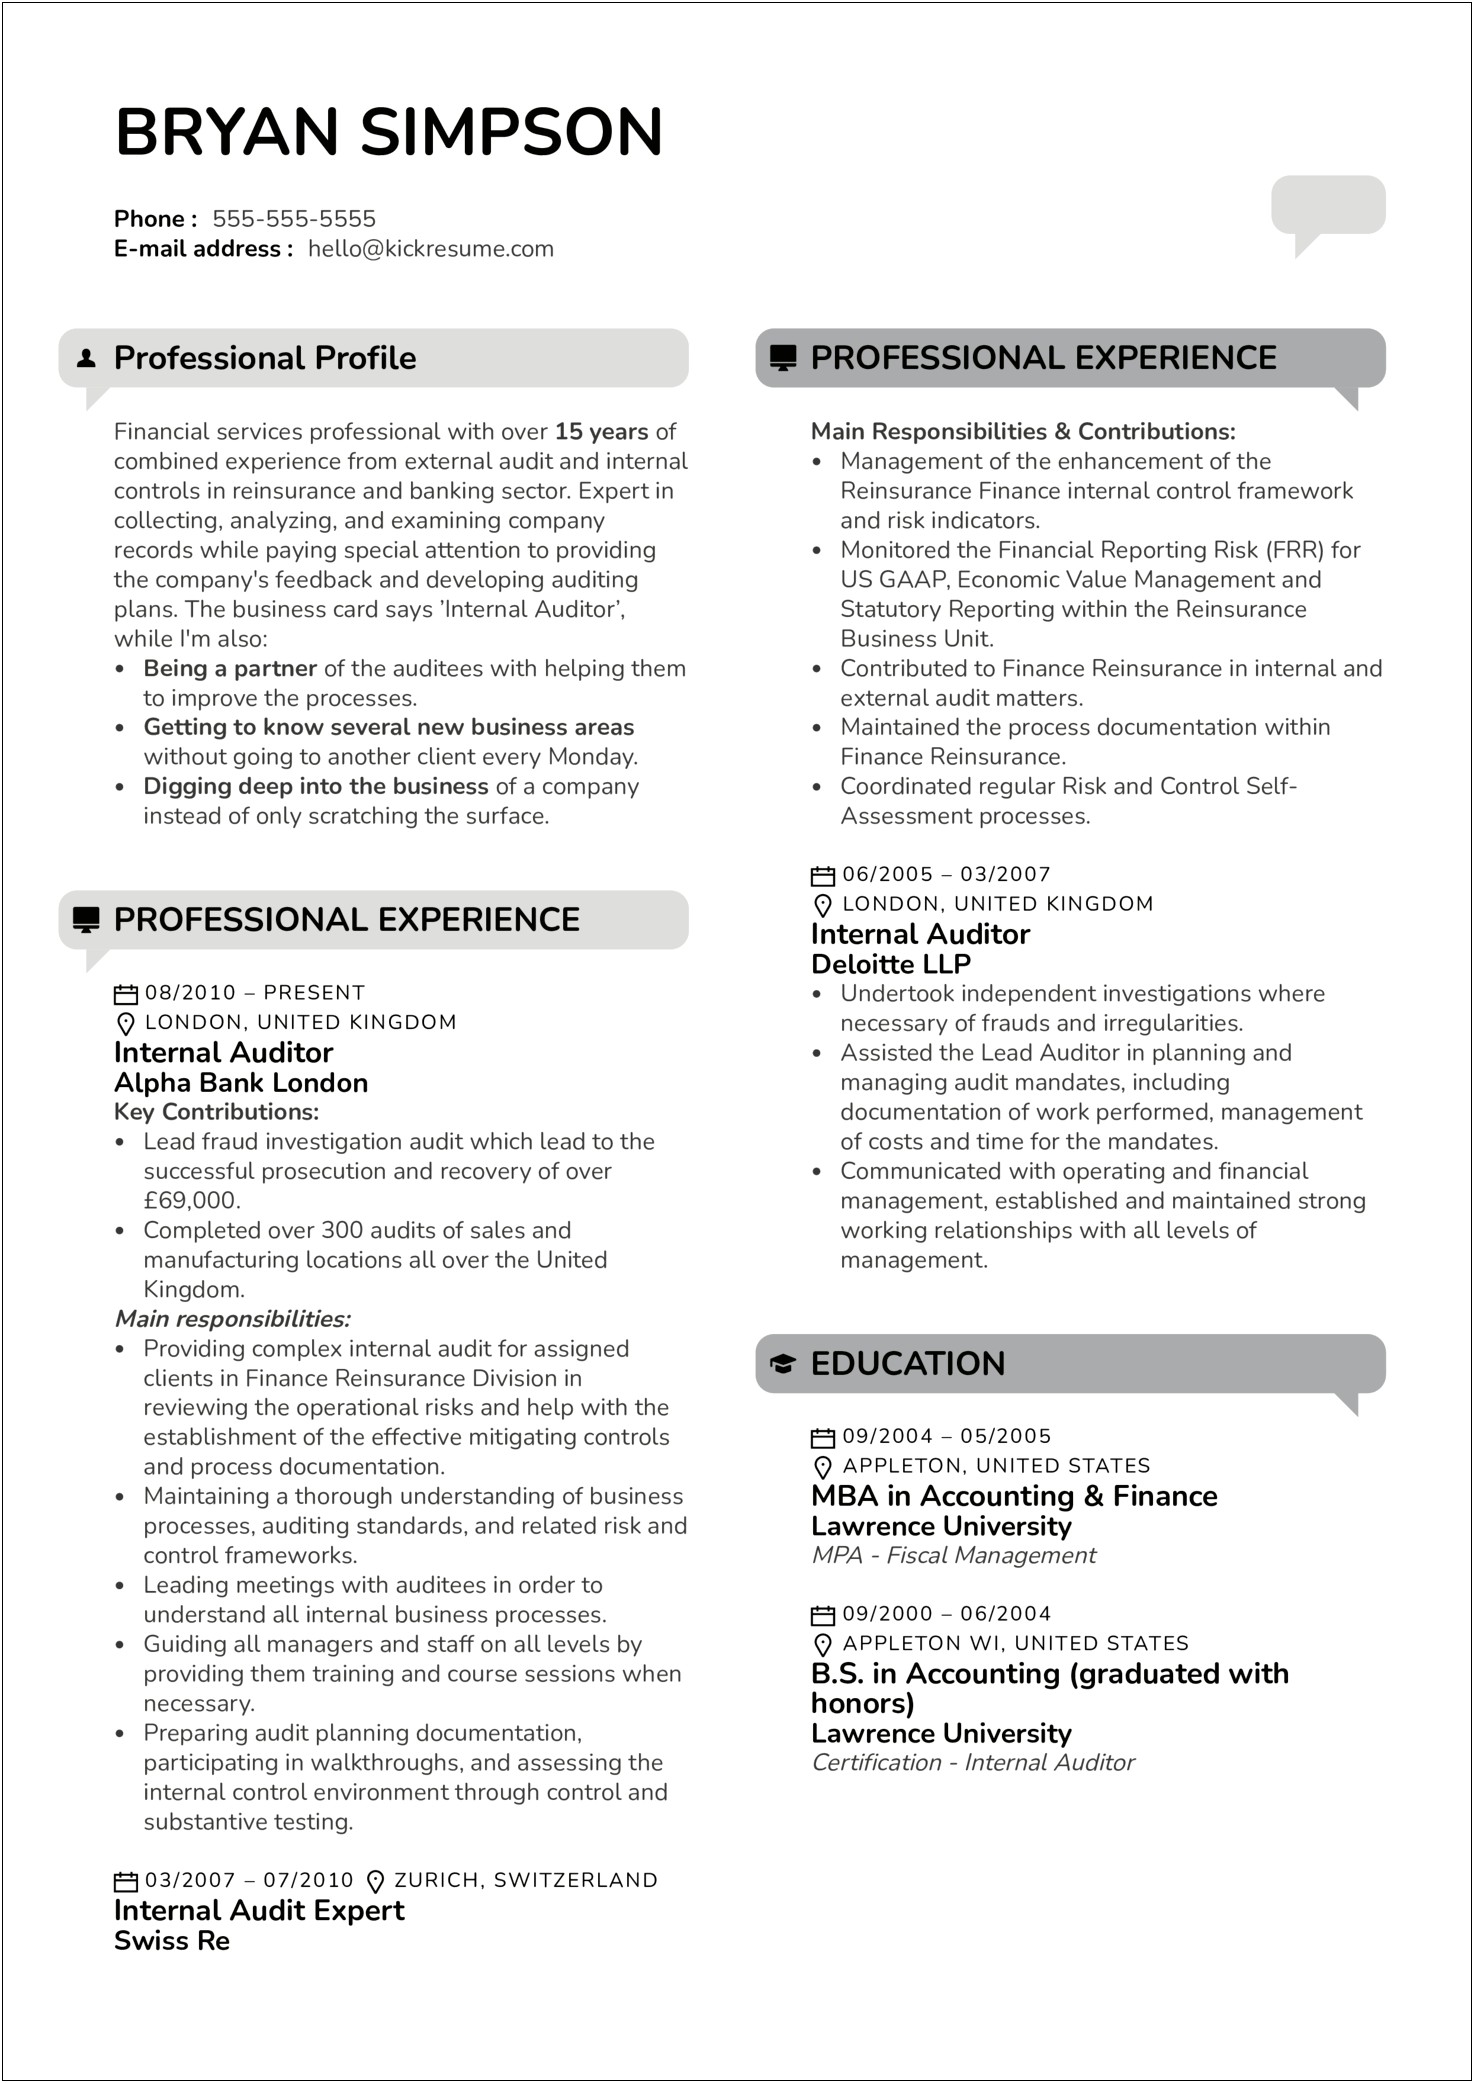 Resume Objective For Staff Audit Position